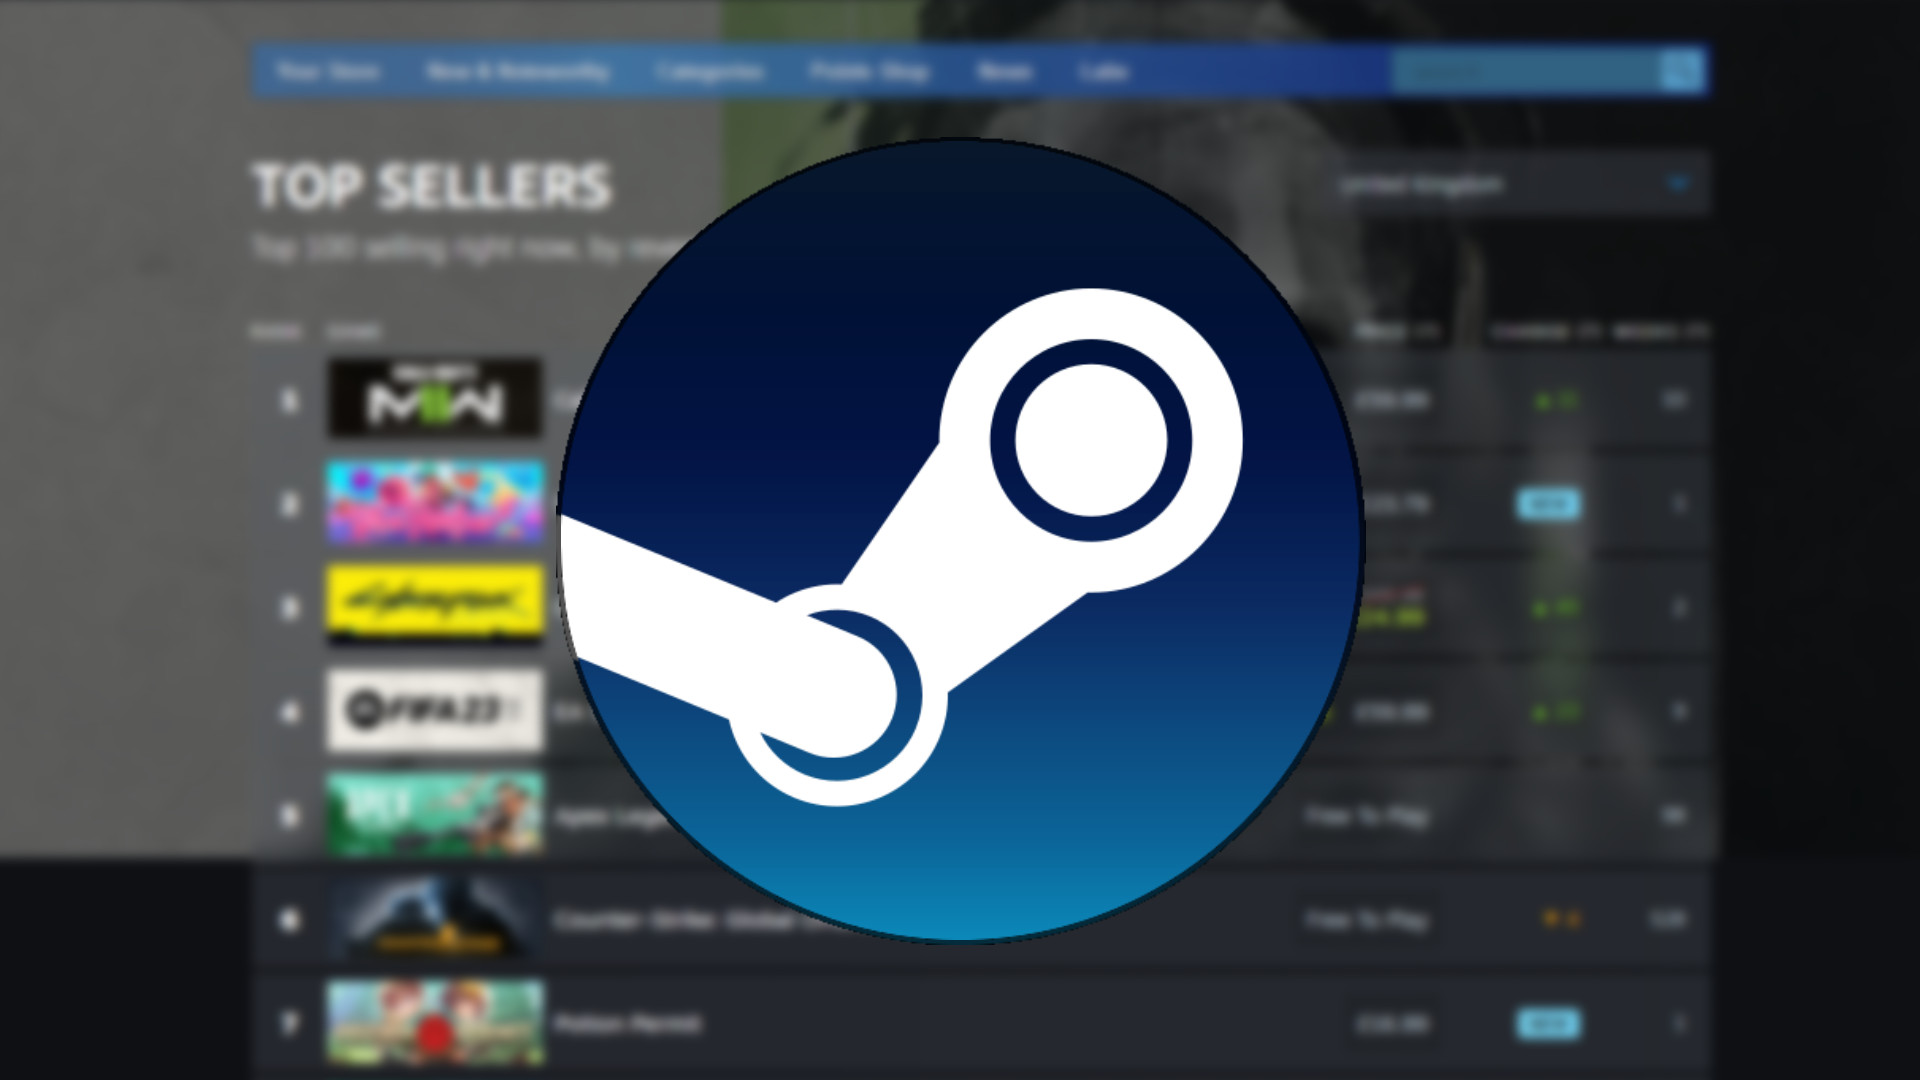 Steam has a new charts hub for top-sellers and most-played games